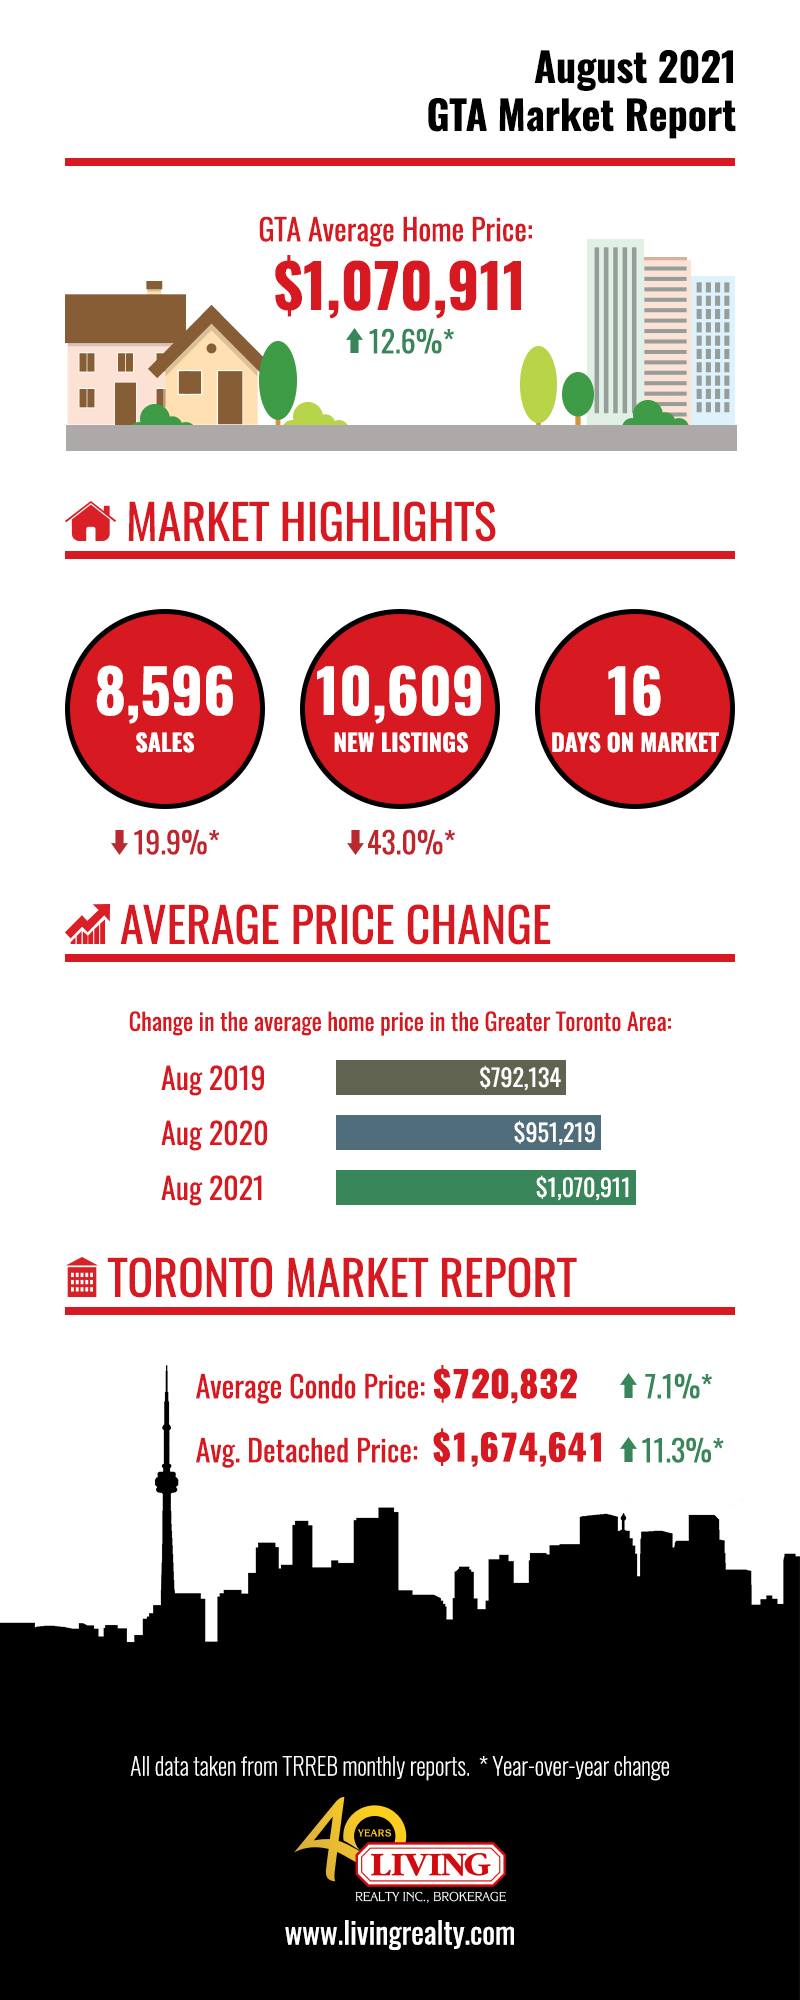 August 2021 housing market numbers for GTA.